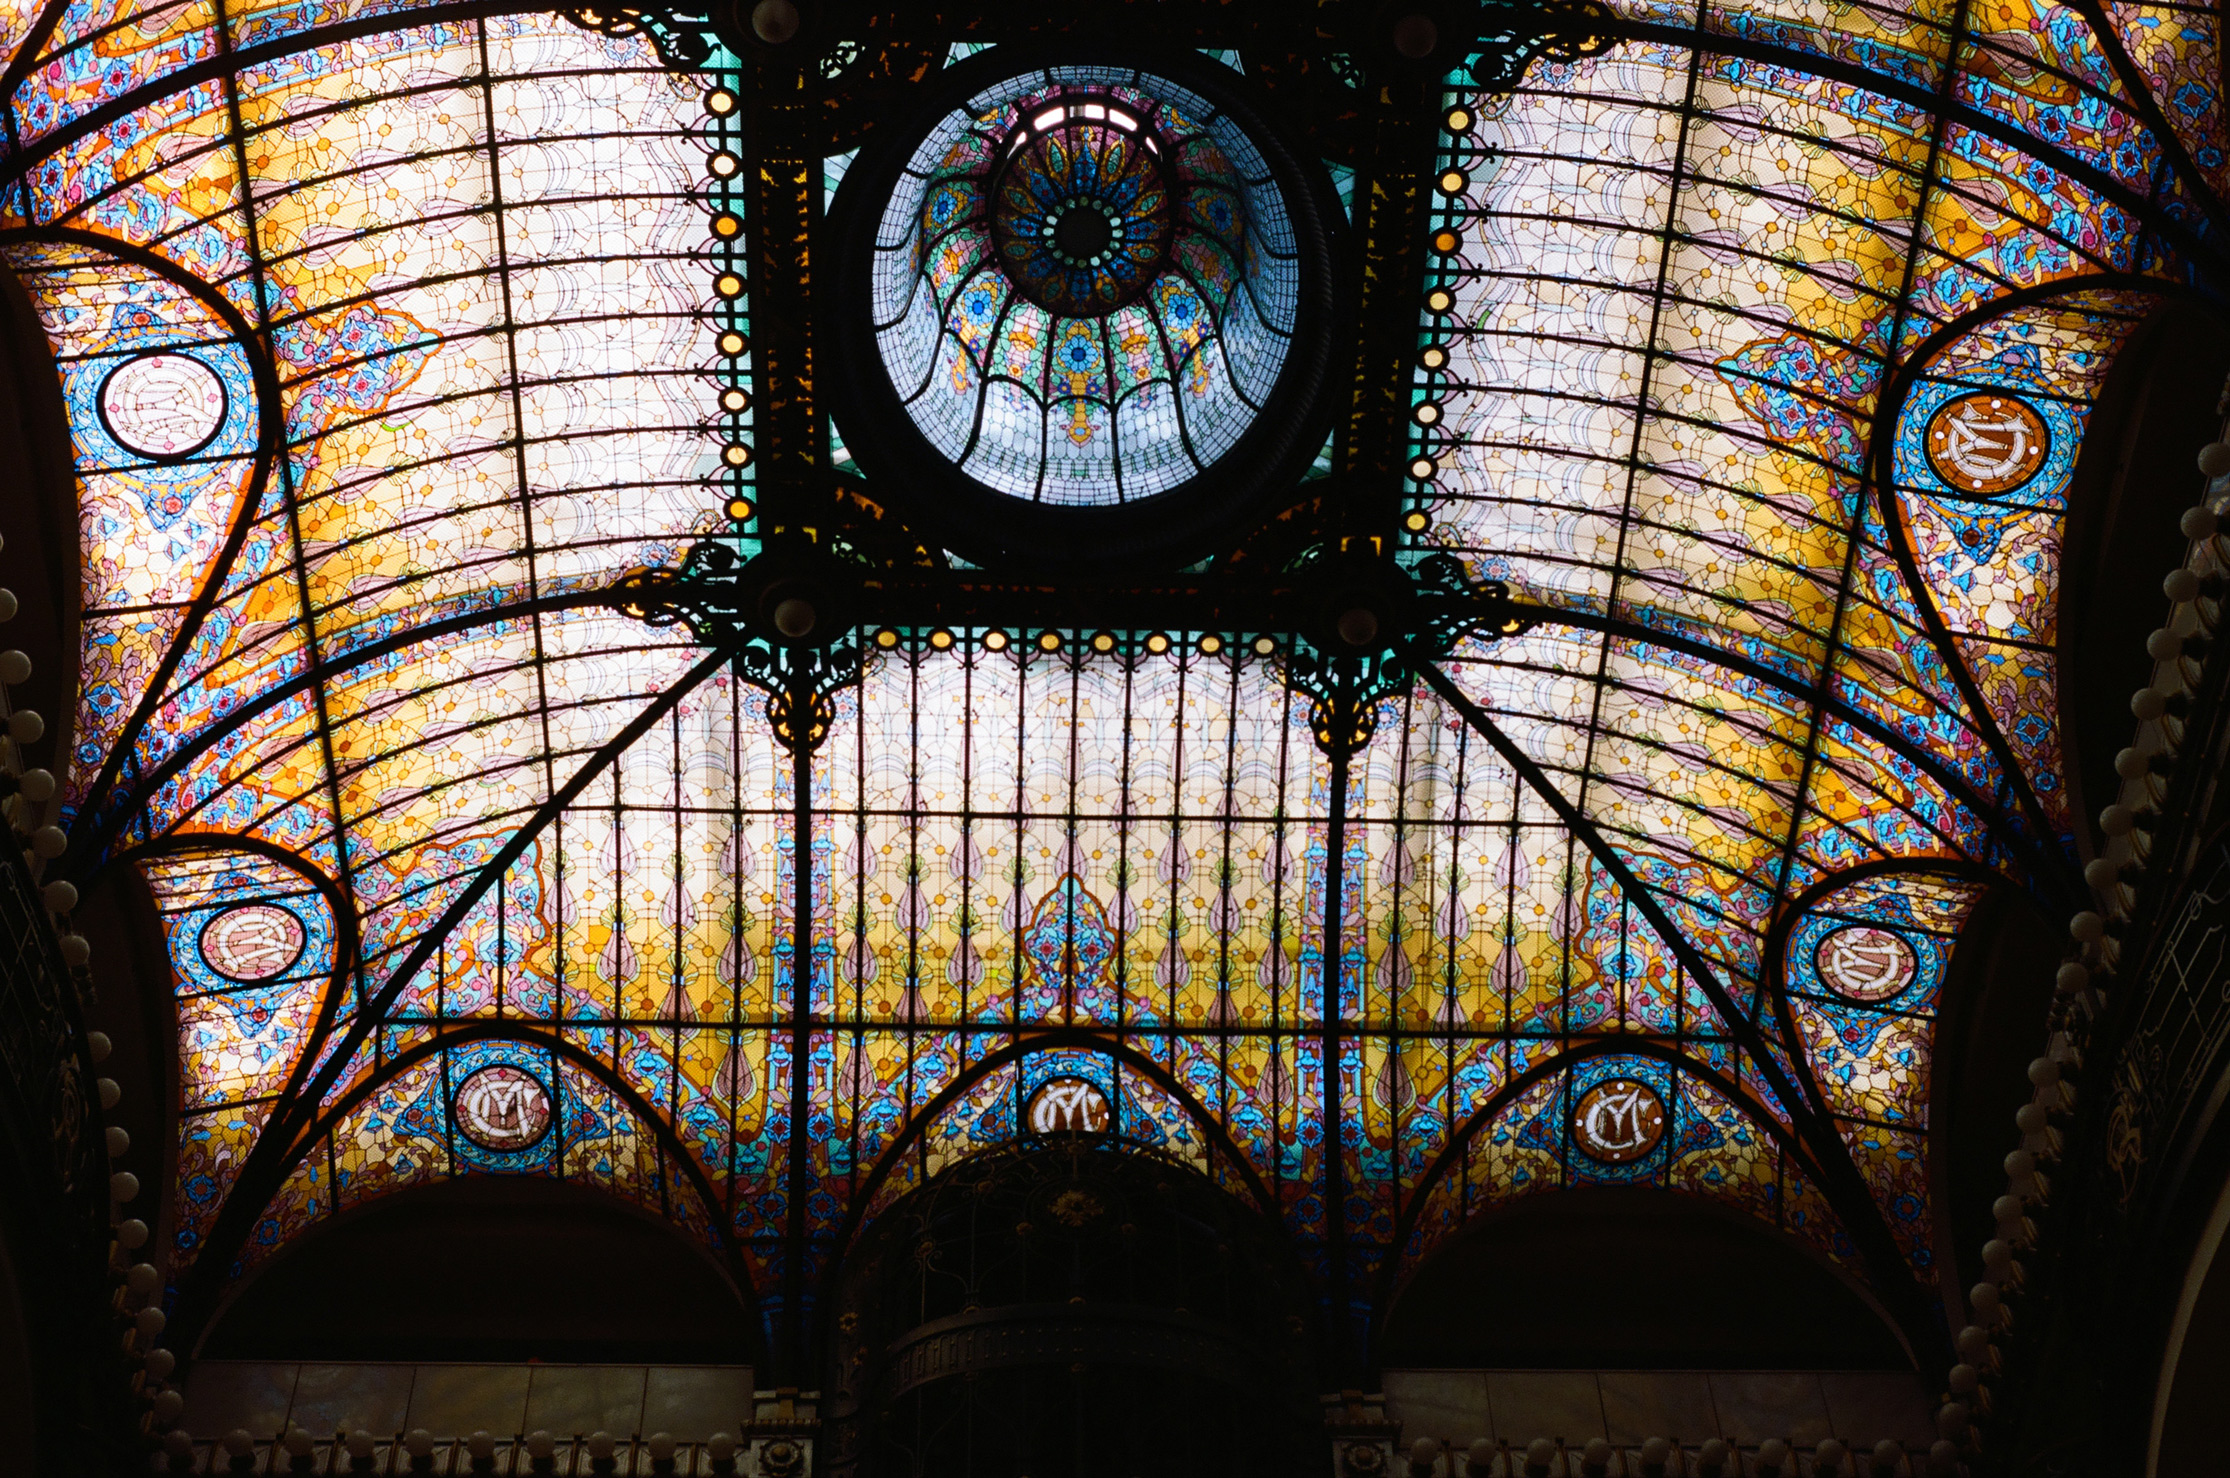 The Gran Hotel with a stained glass window designed by Jacques Gruber in 1908.